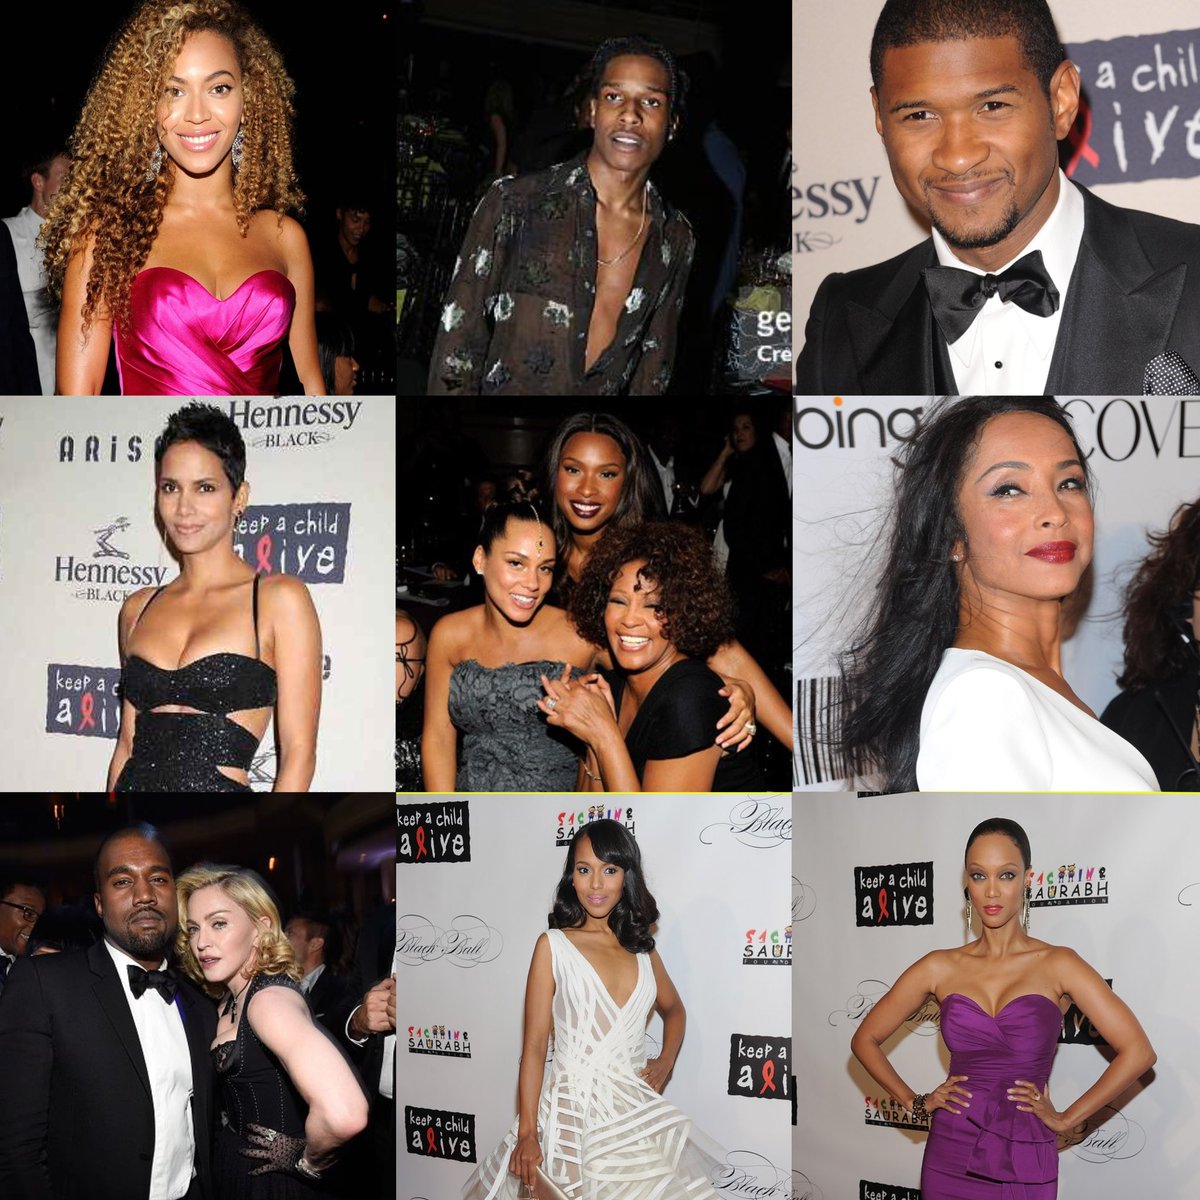 Alicia Keys’ Keep a Child Alive annual Black Ball and some of her guests